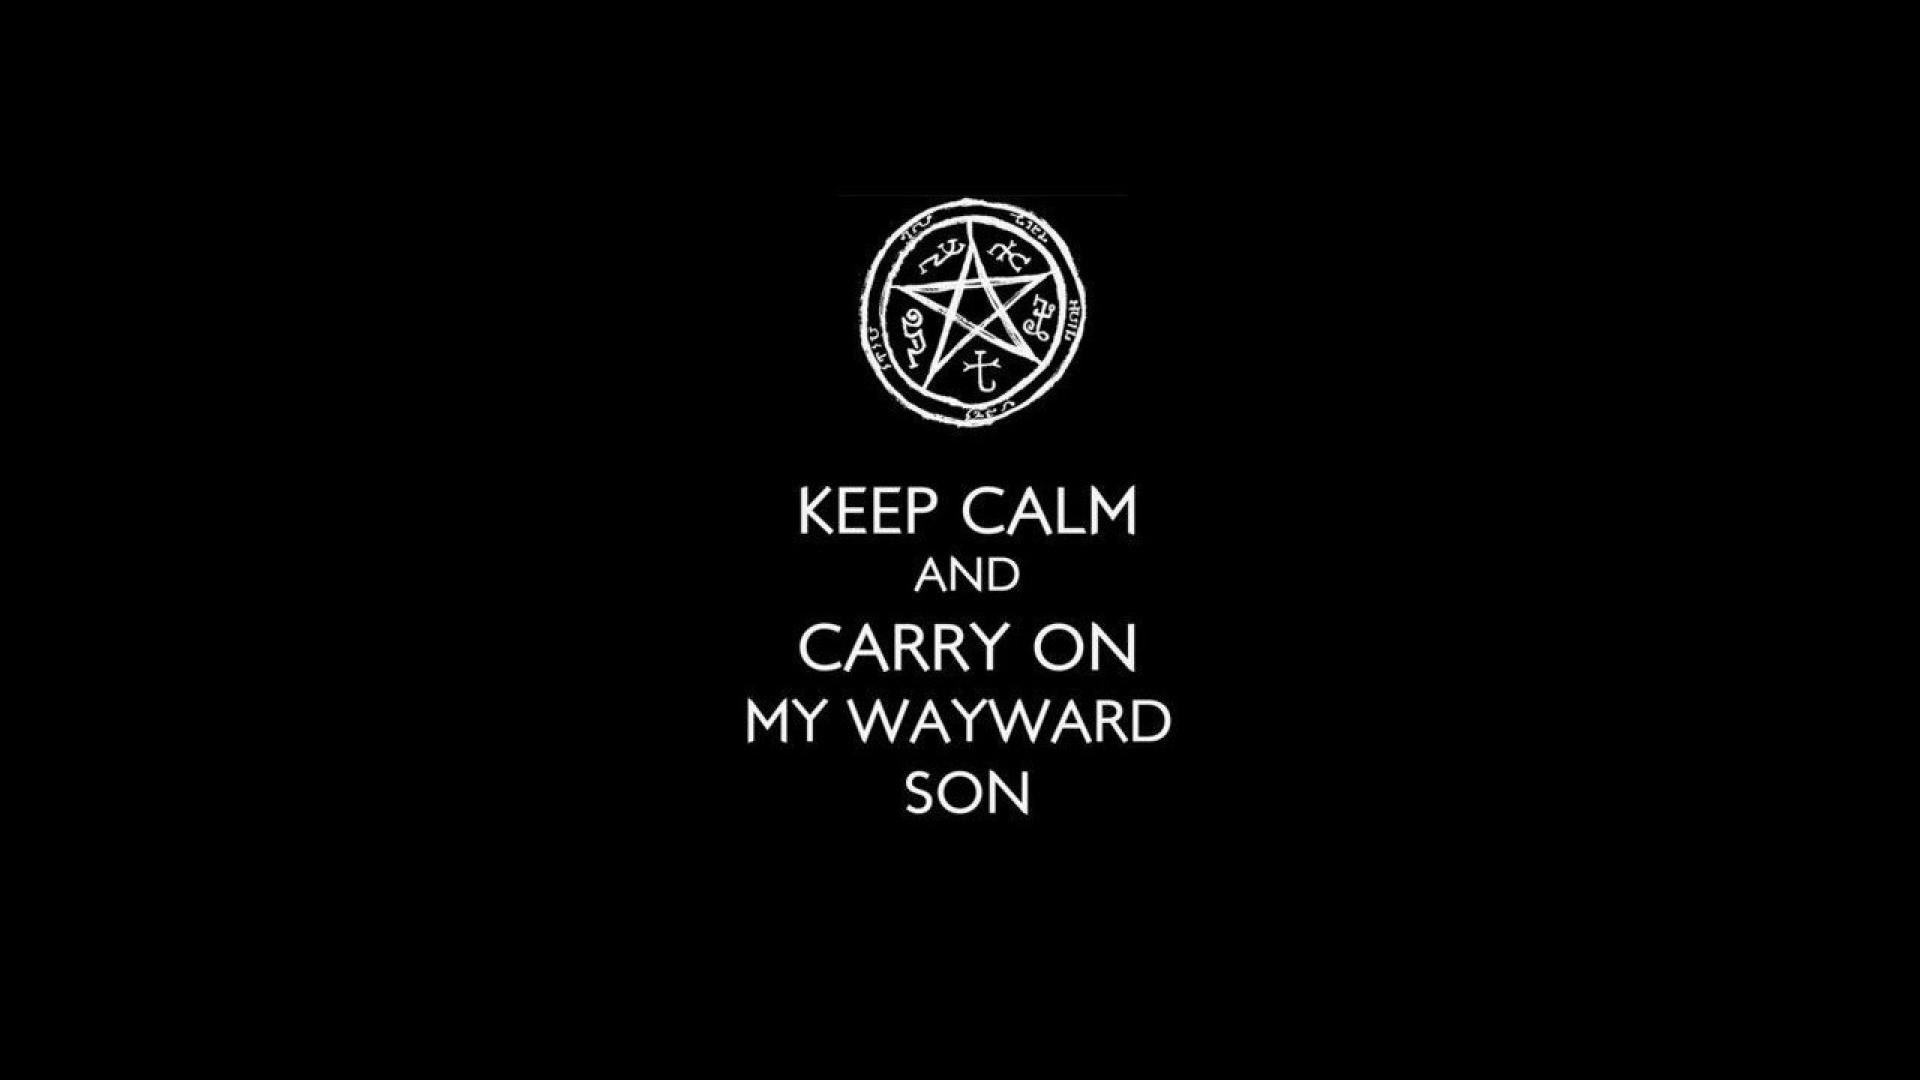 Supernatural son keep calm and wallpapers.